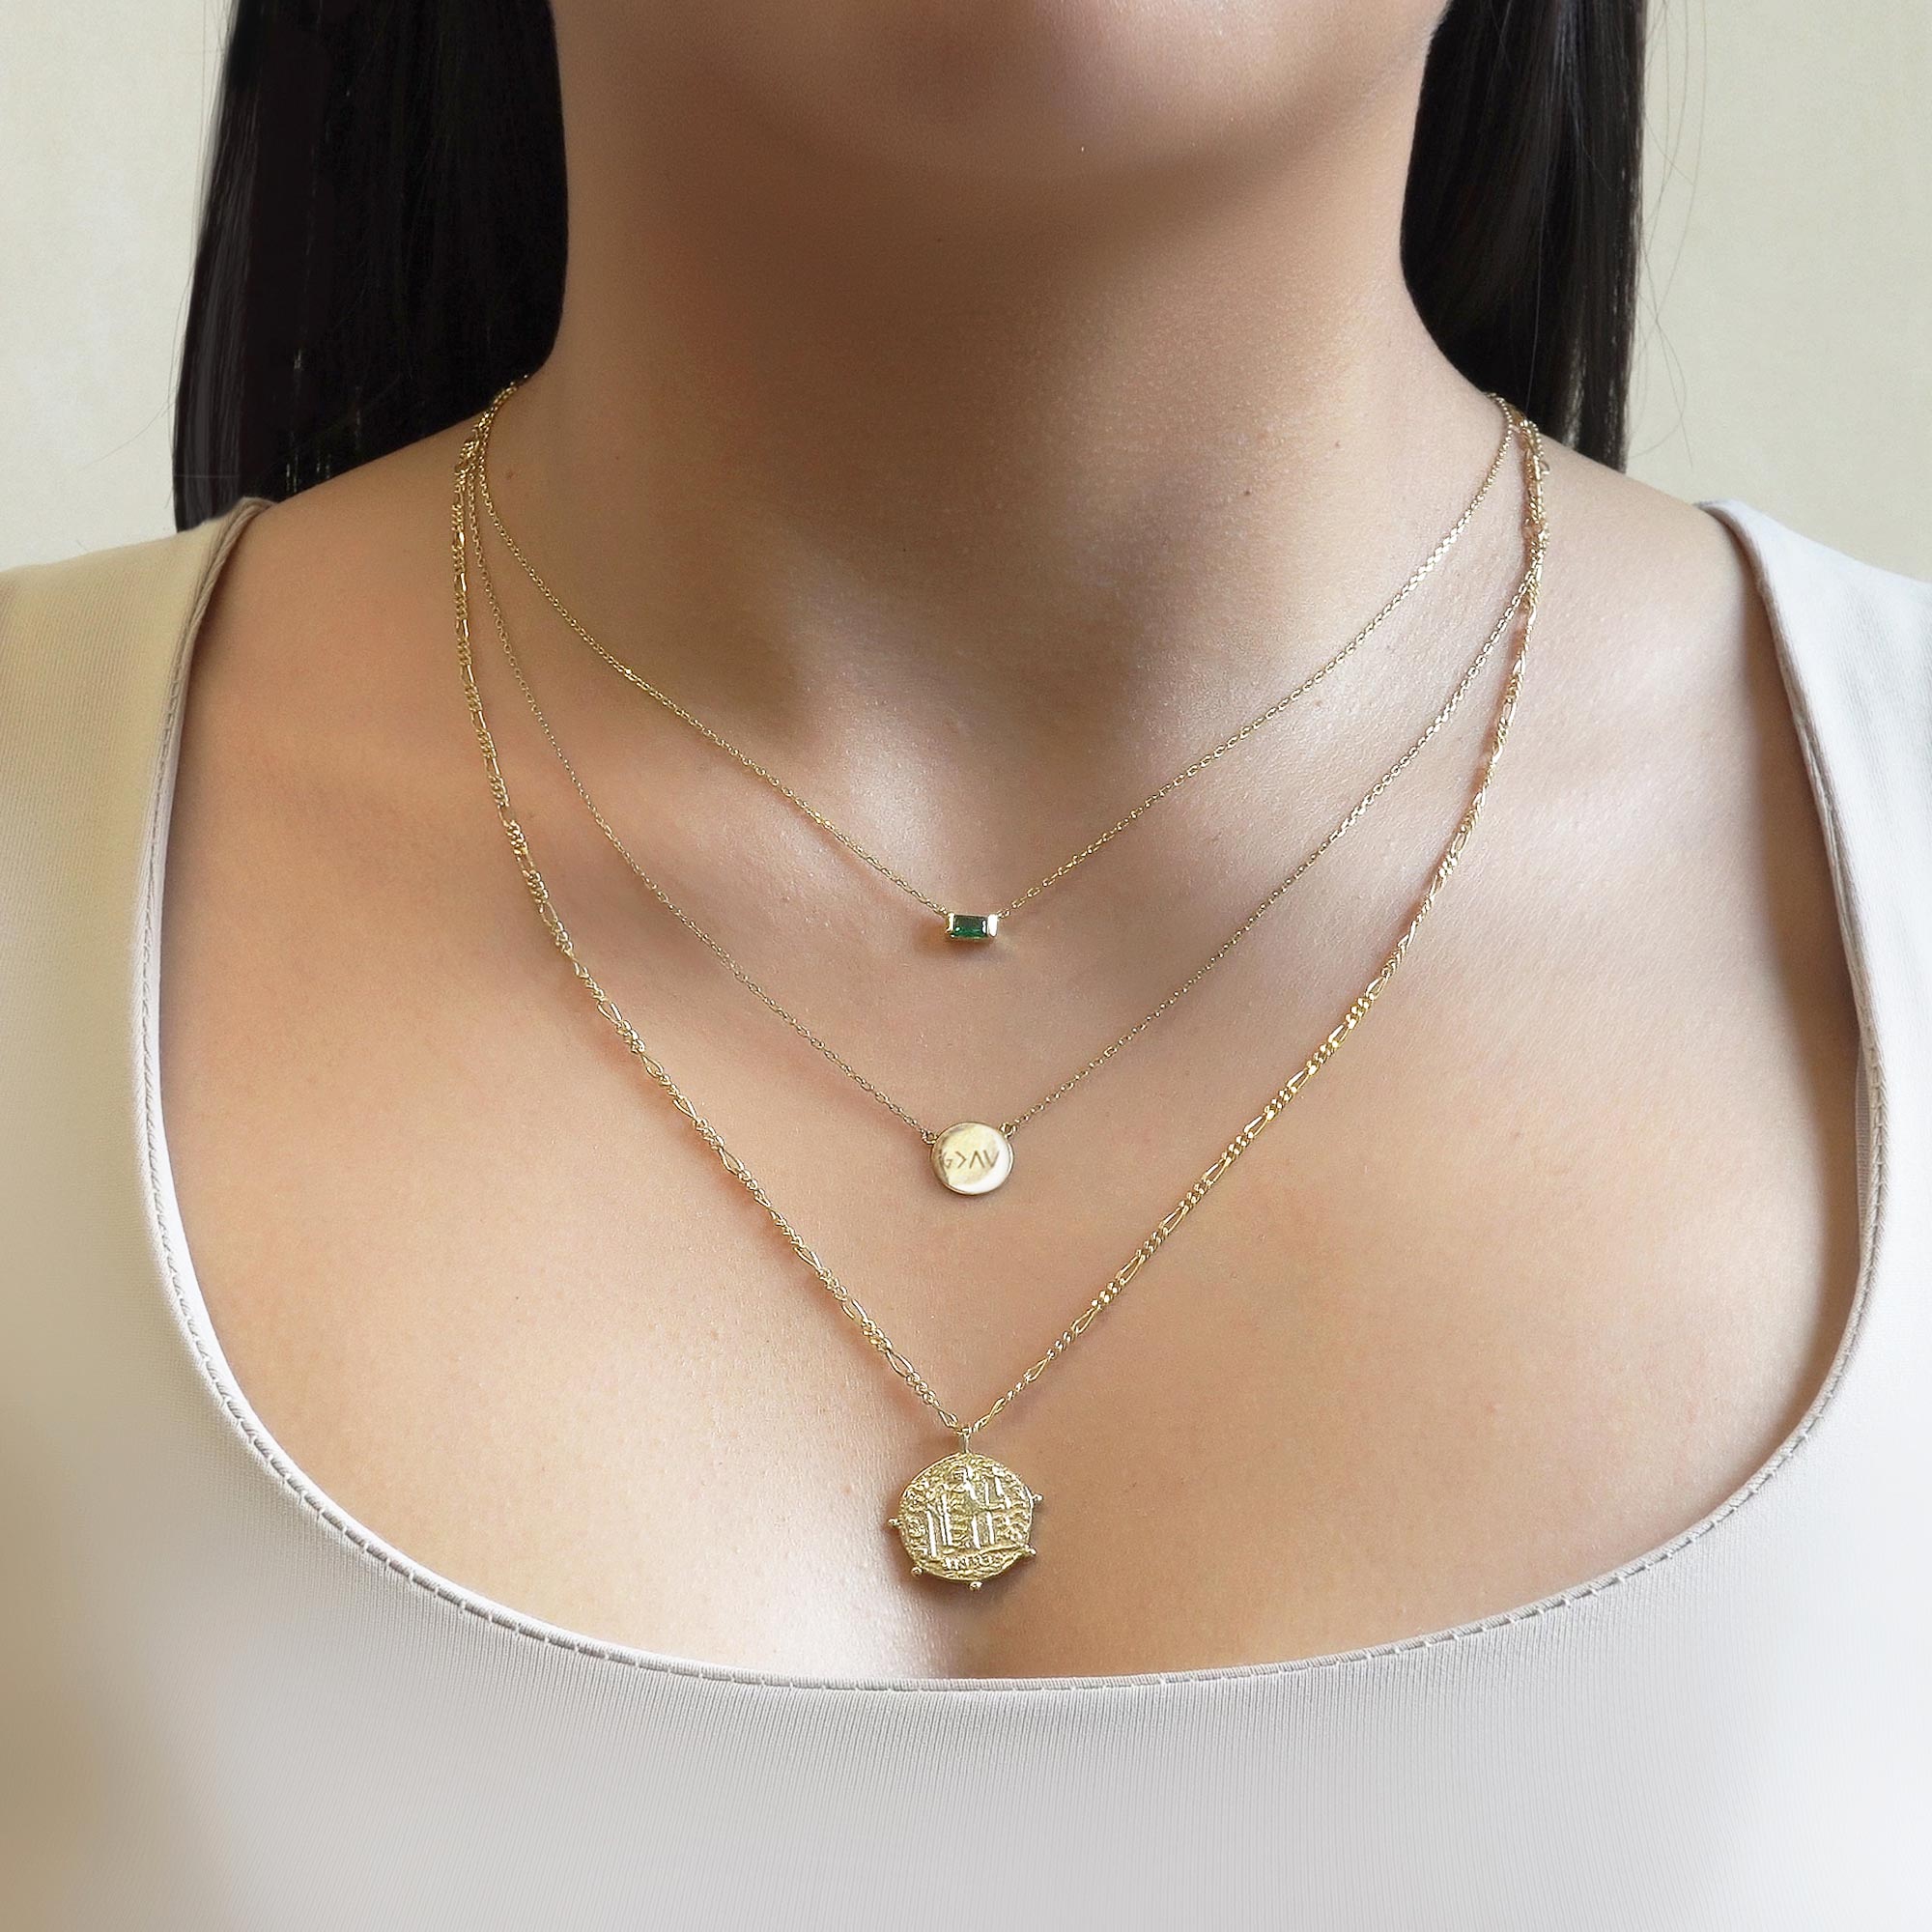 3 Layer Necklace, Layered Necklace Set, Gold Disc Necklace, Gold Necklace,  Thick Chain Necklace, Gold Layering Necklace, Pendant Necklace 